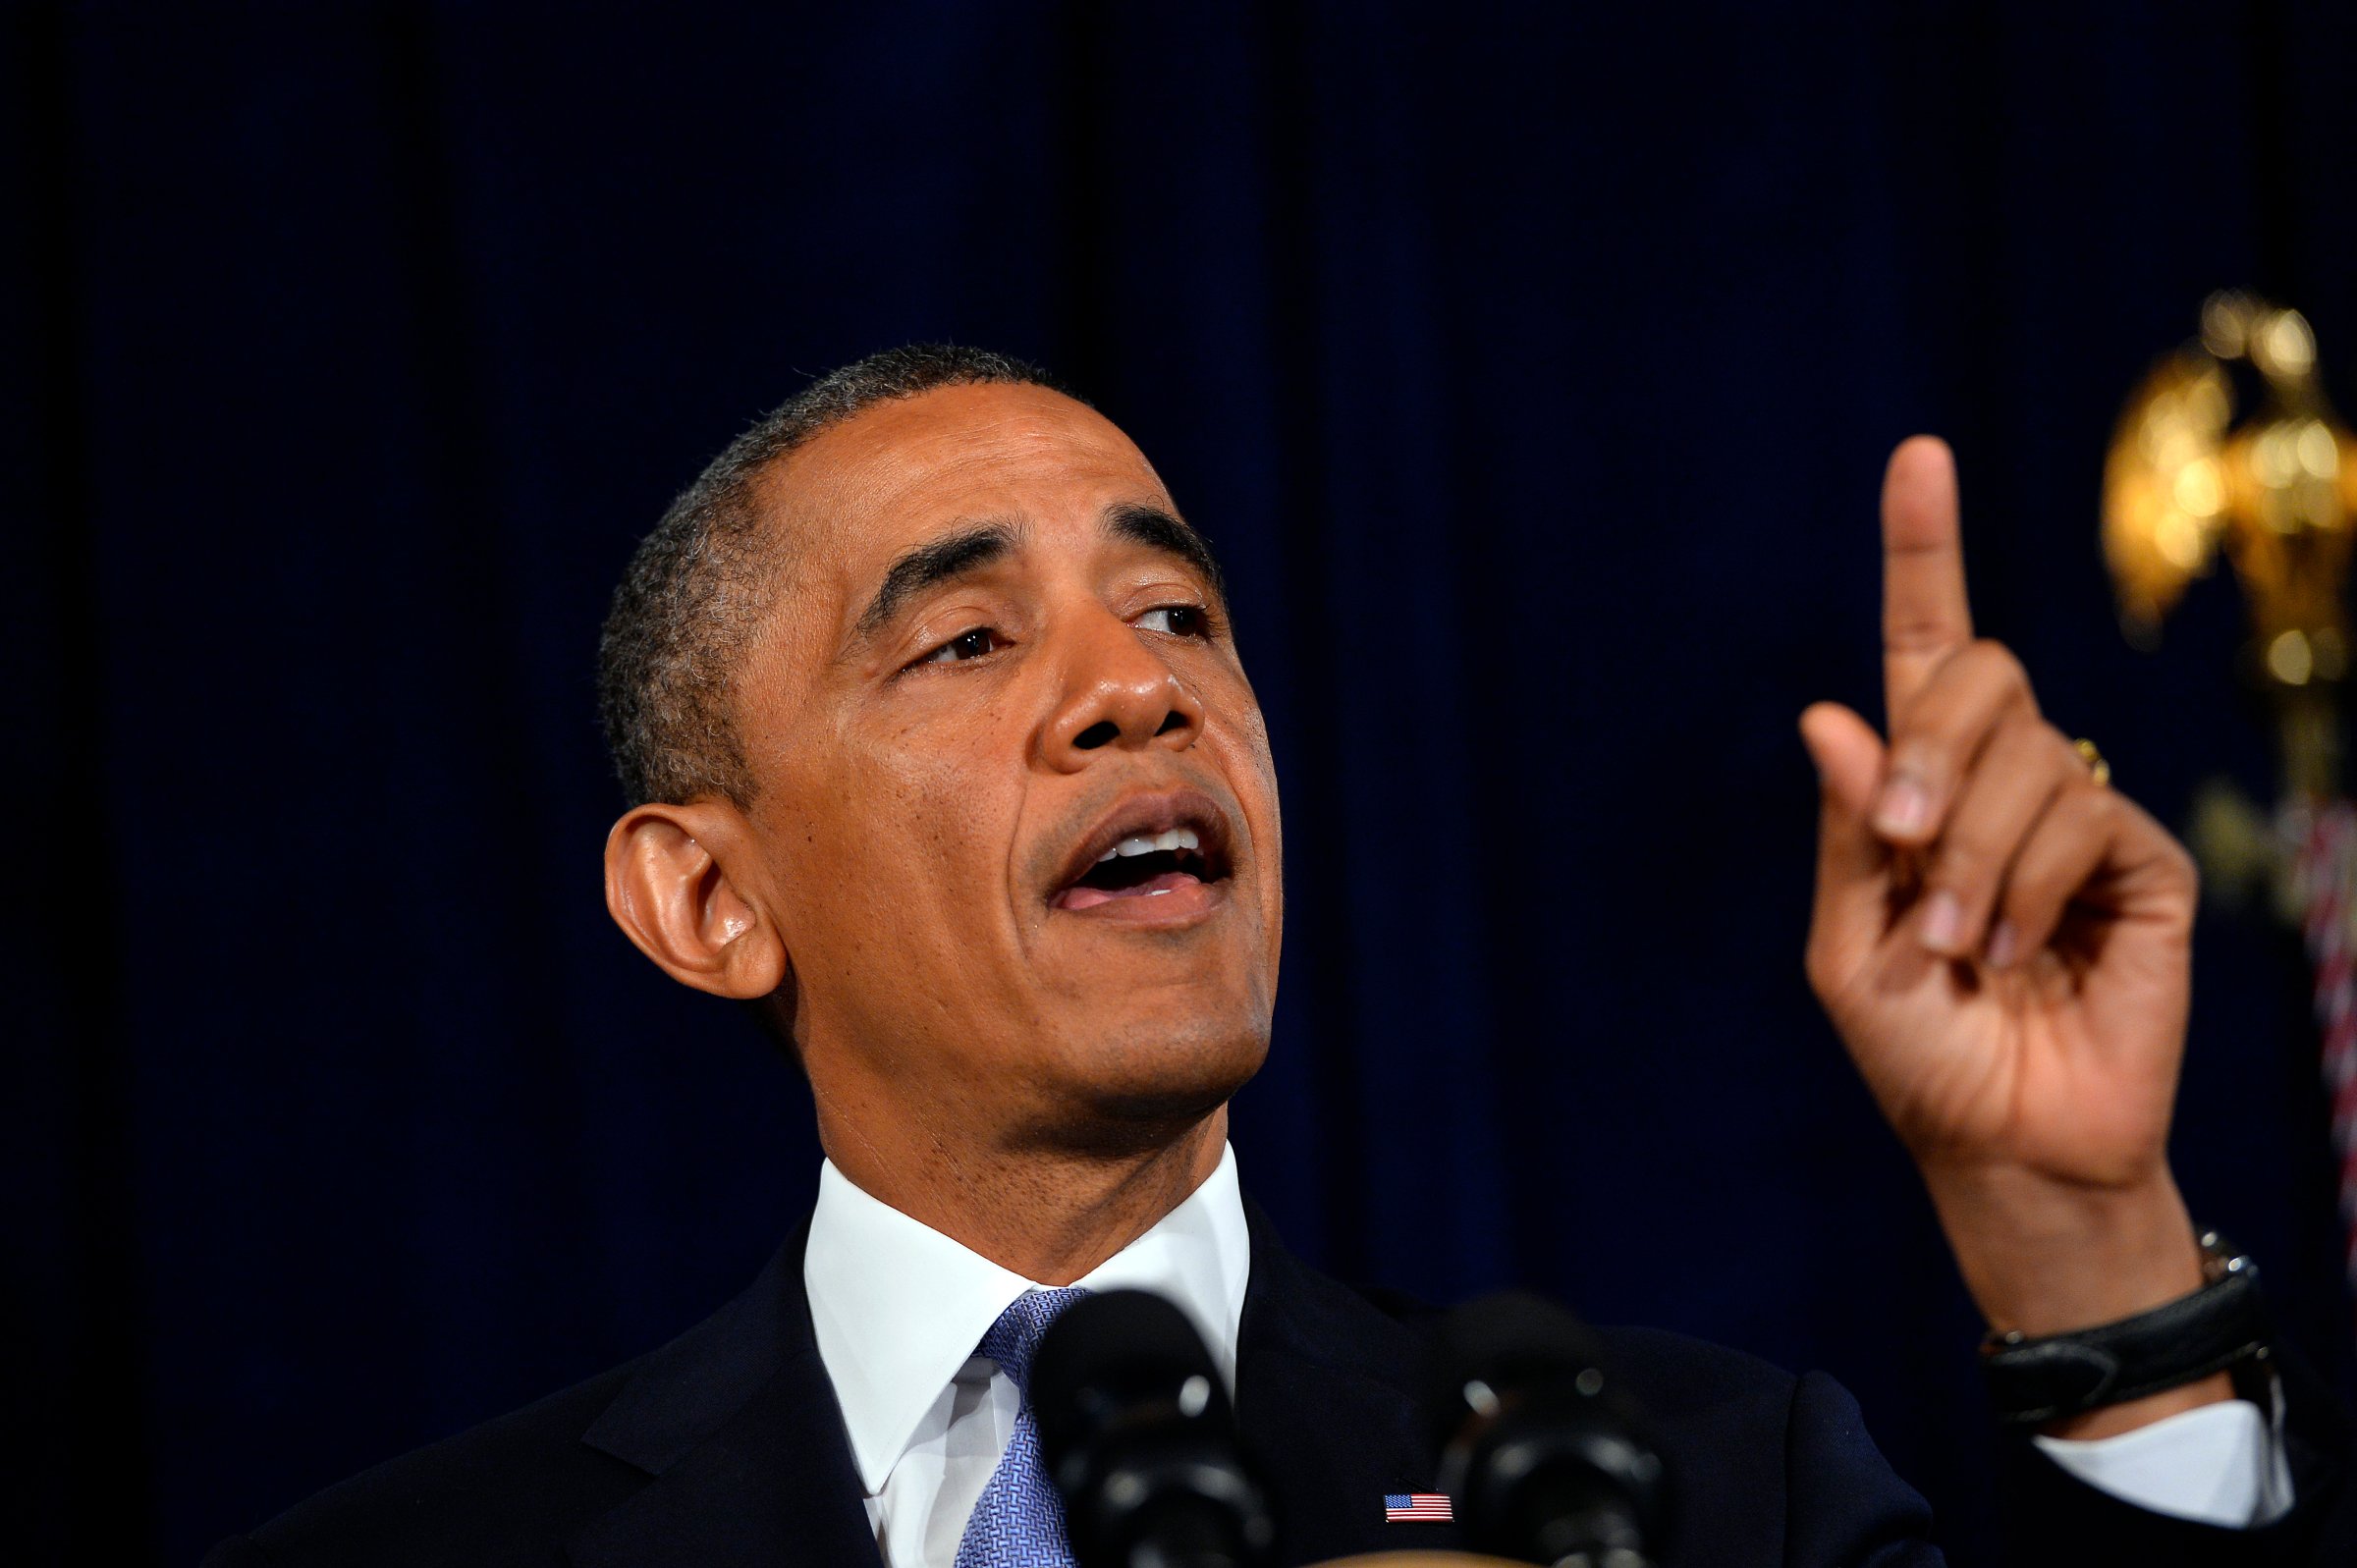 U.S. President Barack Obama at a press conference at the Fairmont Hotel in San Jose, Calif., on June 7, 2013.